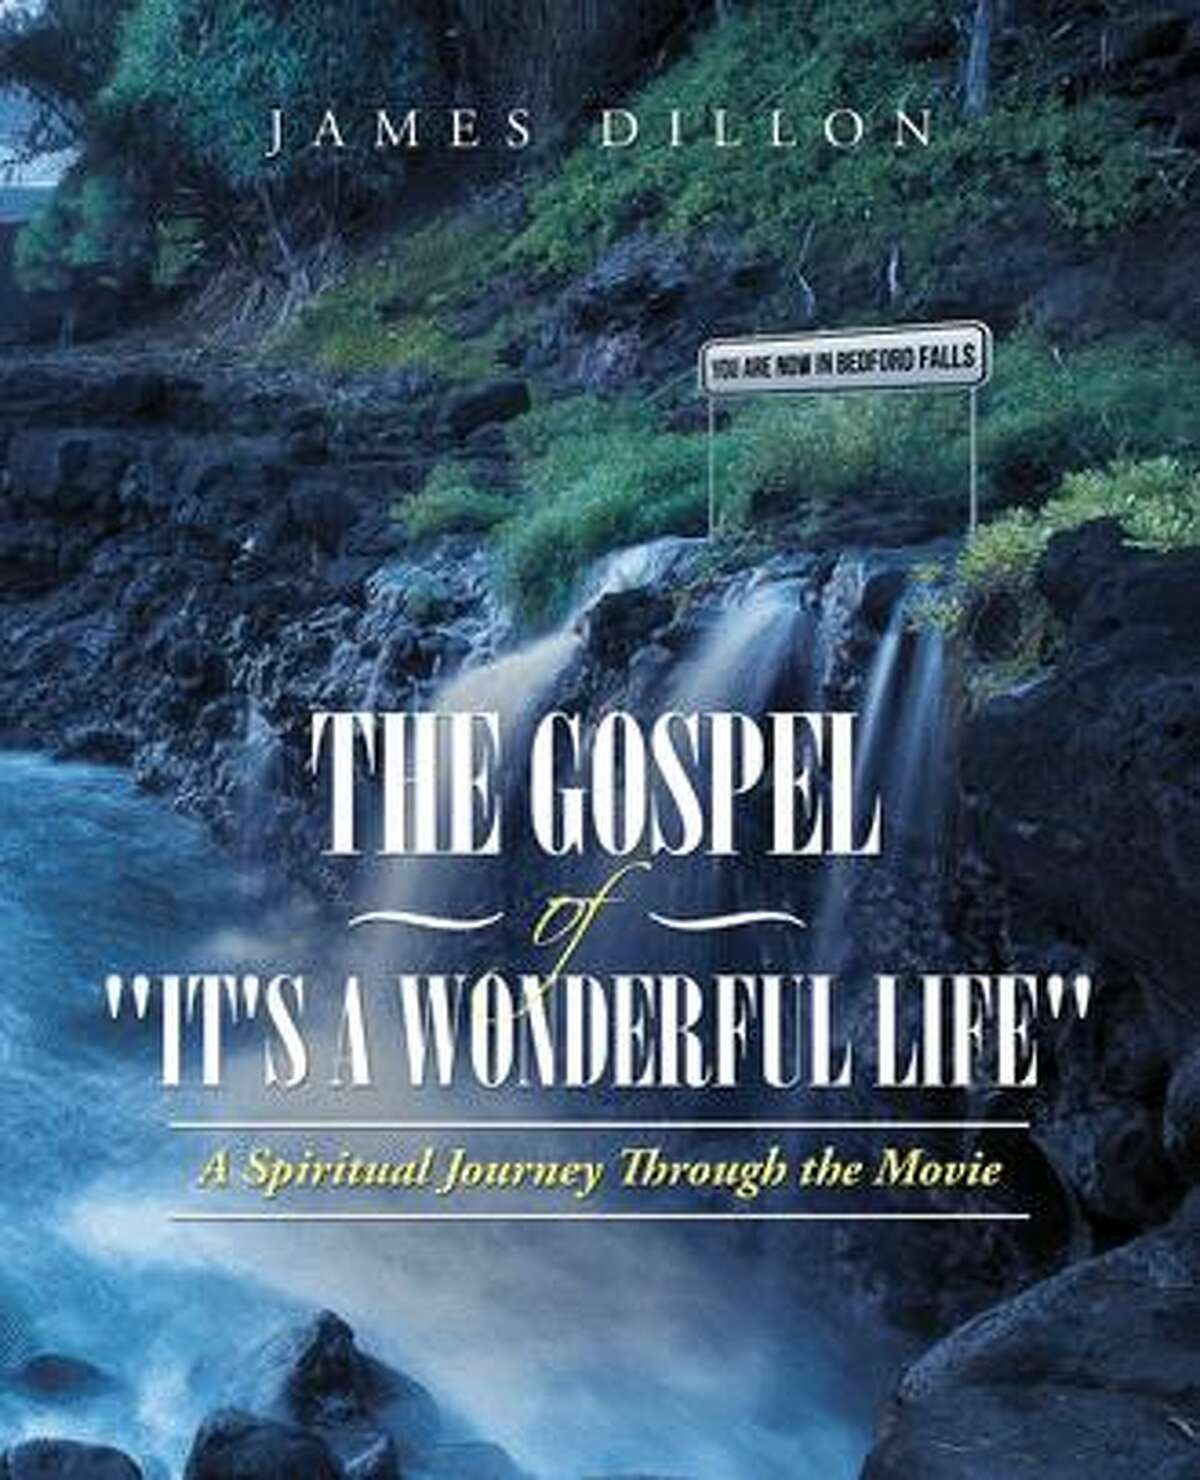 "The Gospel of 'It's a Wonderful Life'" by James Dillon.